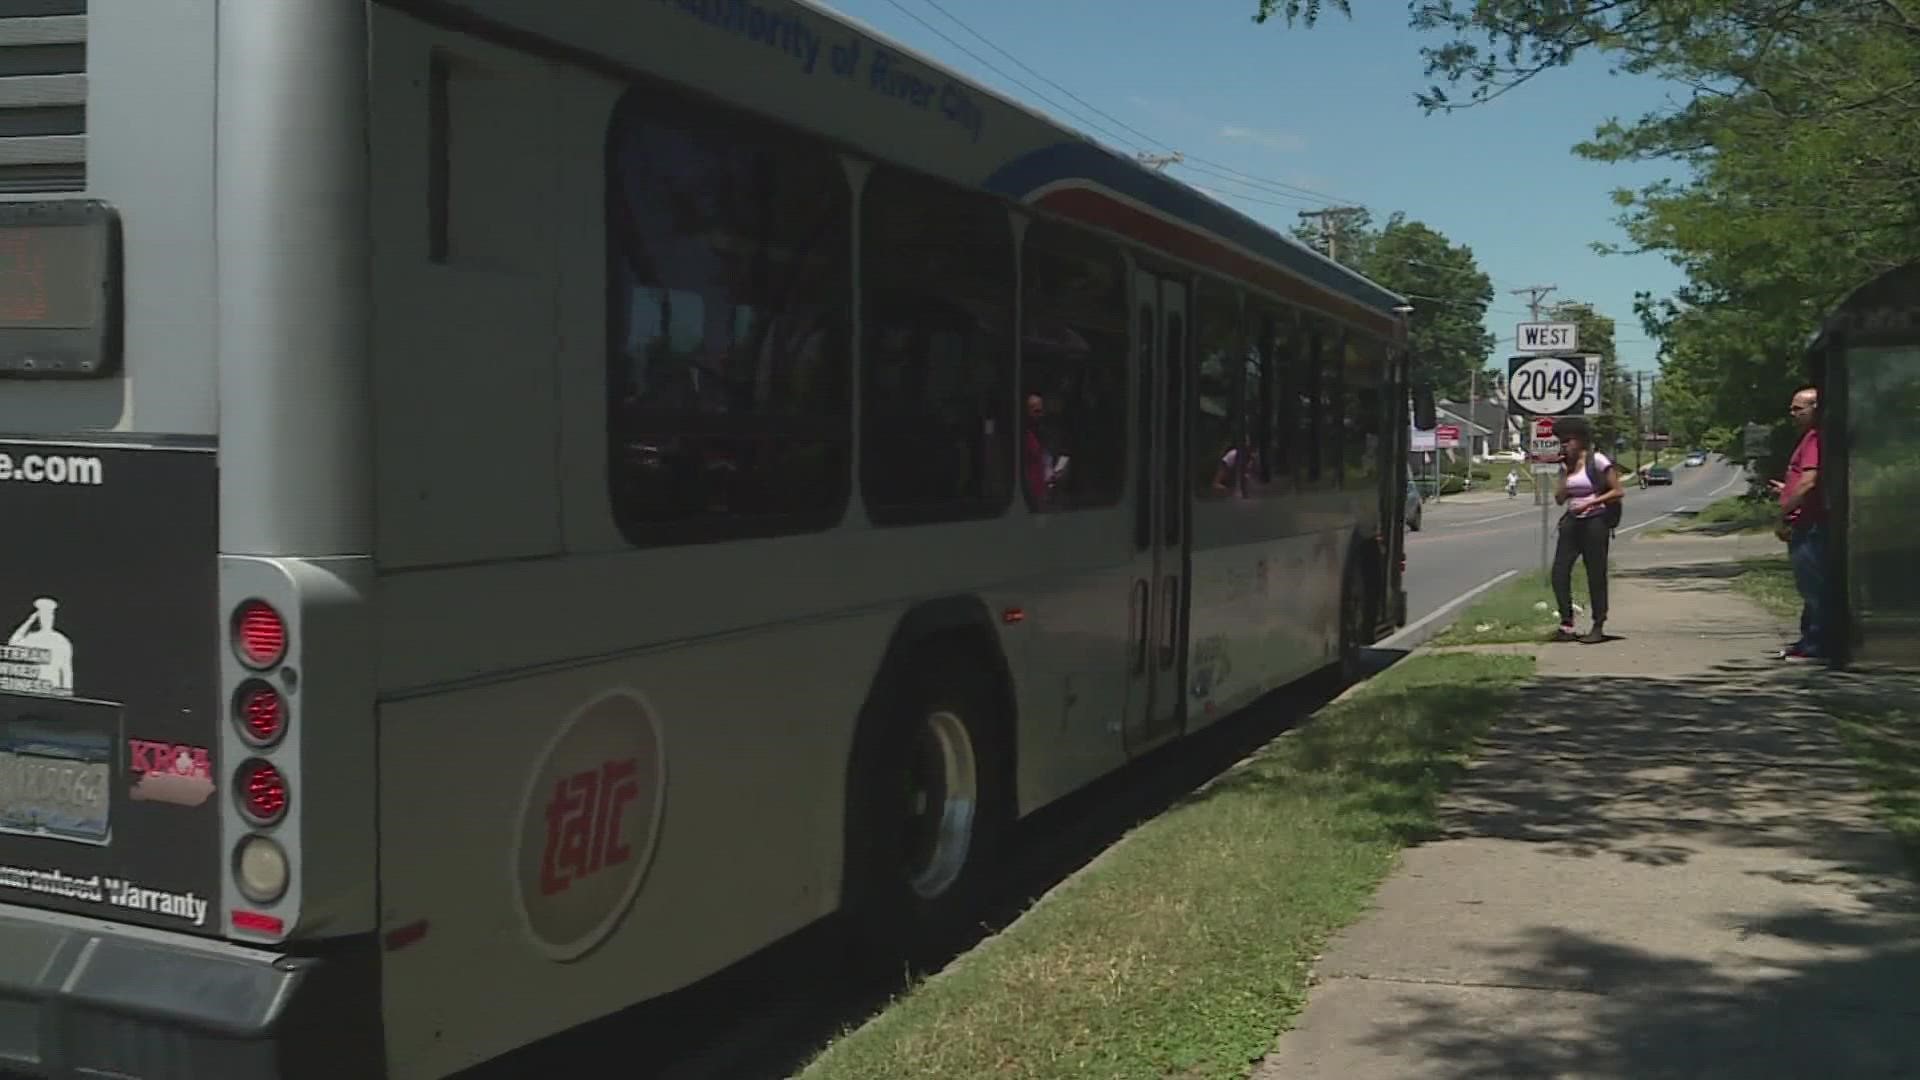 Per Kentucky law, public employees like TARC drivers aren't allowed to strike or engage in work stoppage.